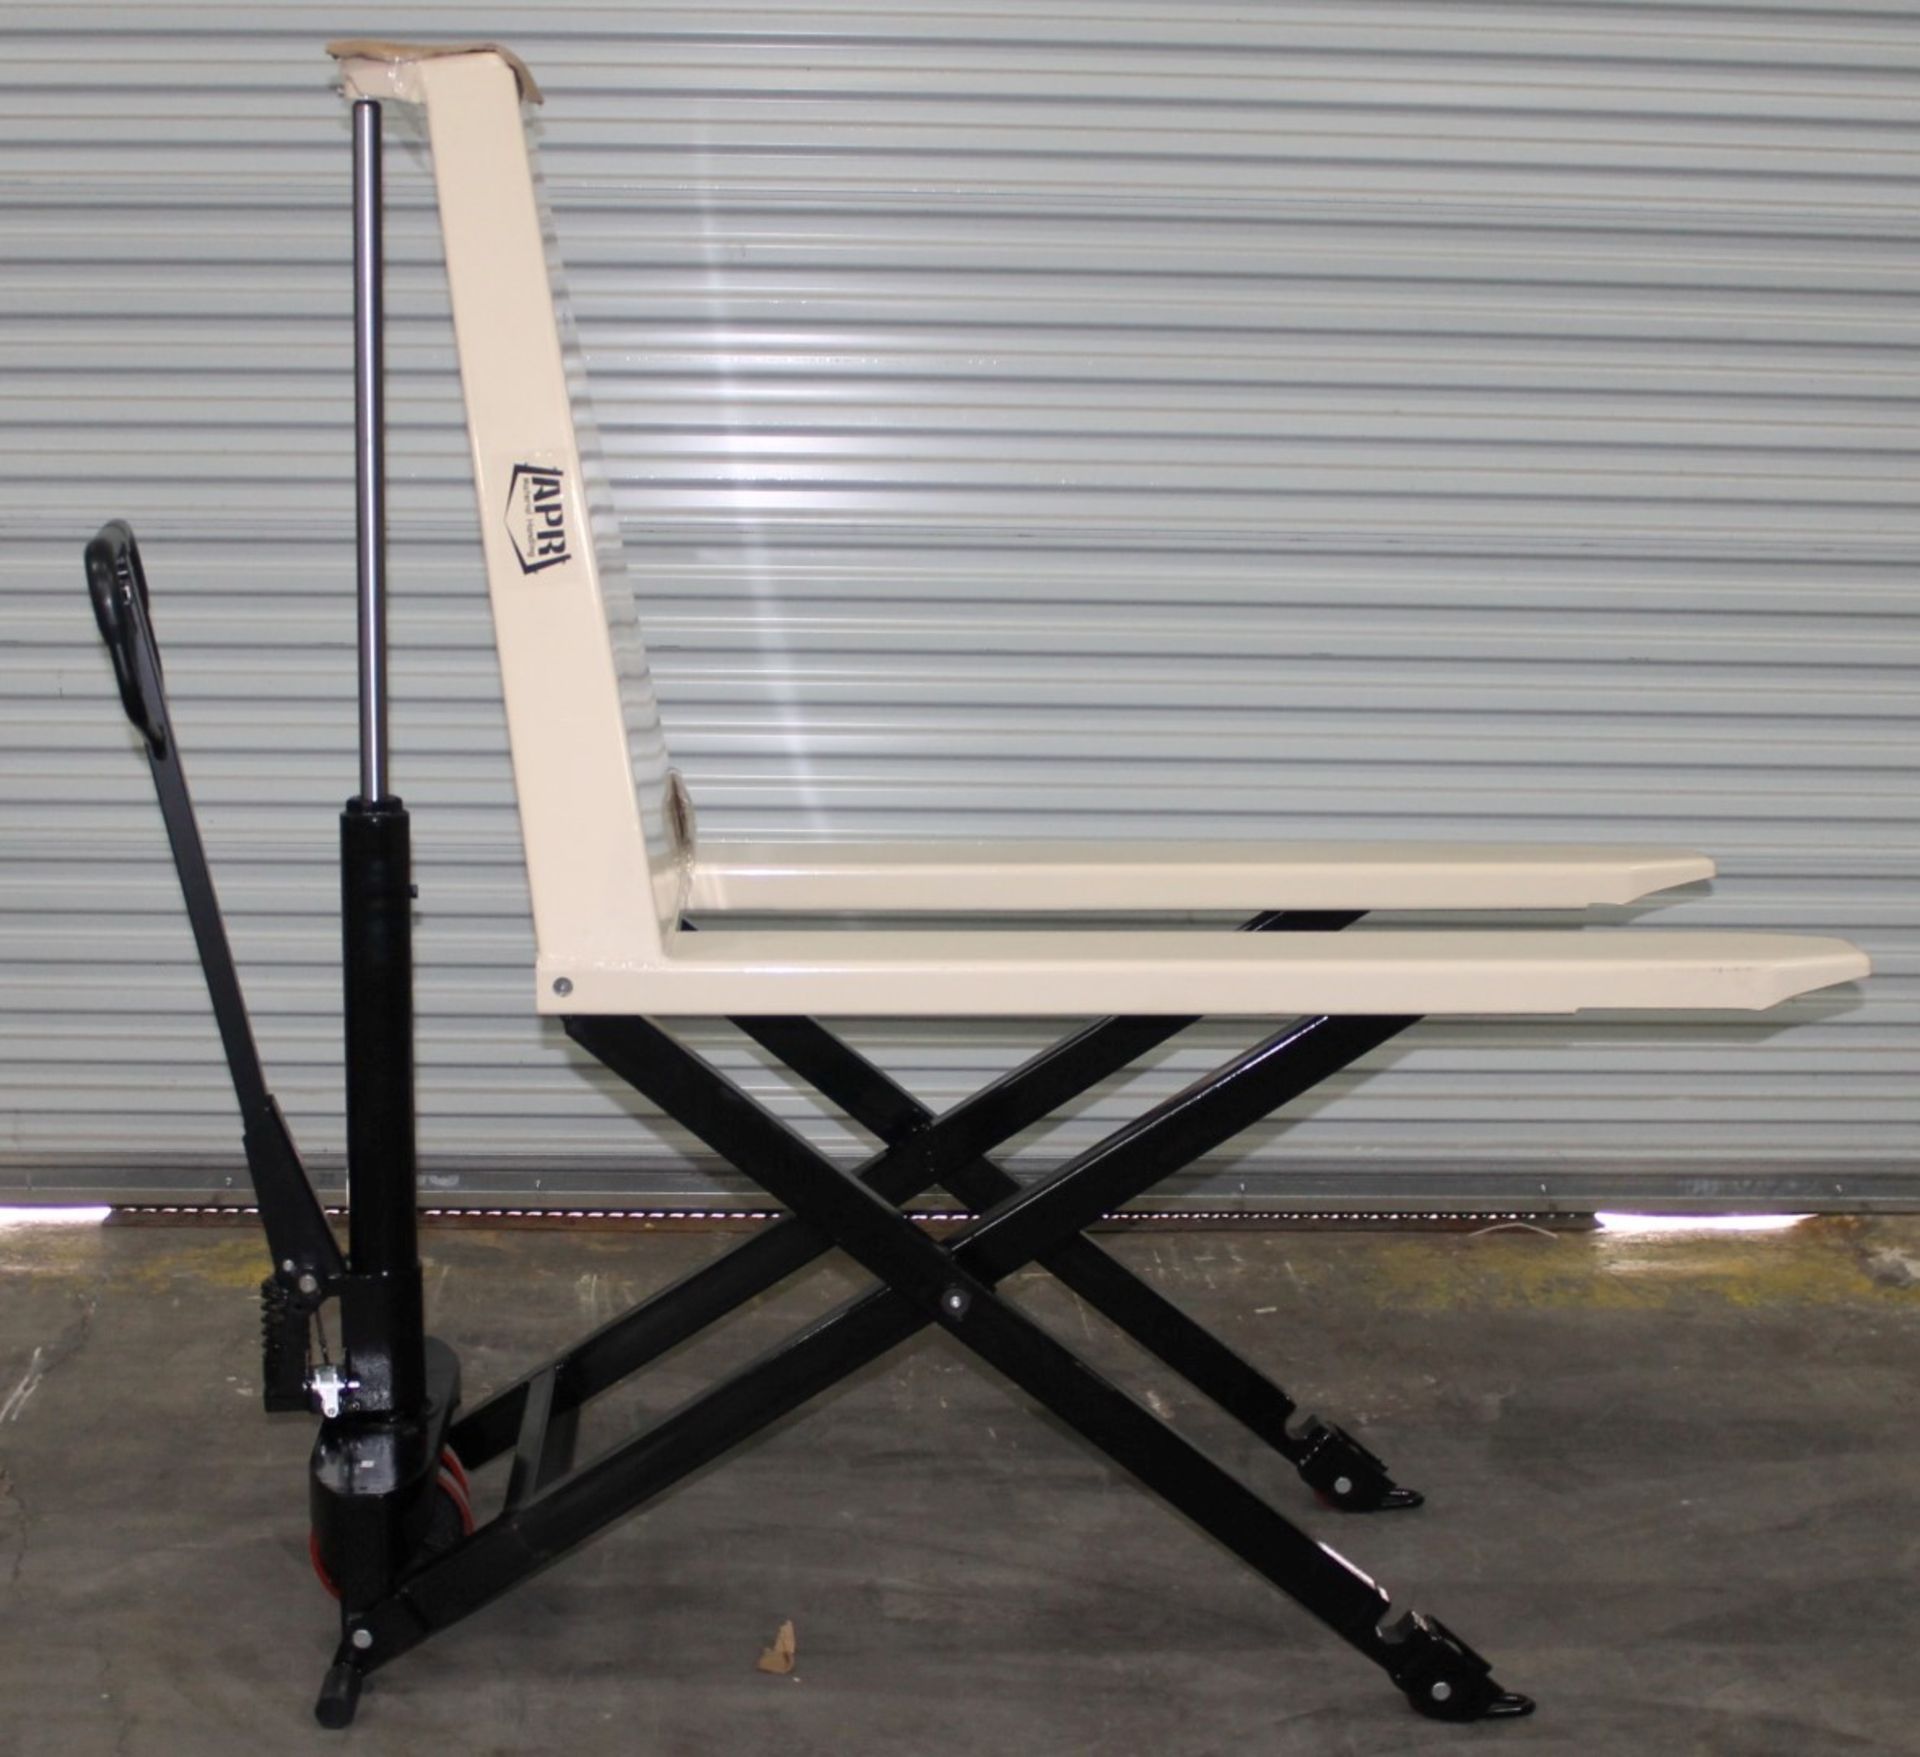 HIGH LIFT PALLET TRUCK,  CAPACITY: 2200 lb, FORK SIZE: 27" x 48", LOWERED FORK HEIGHT: 3.35